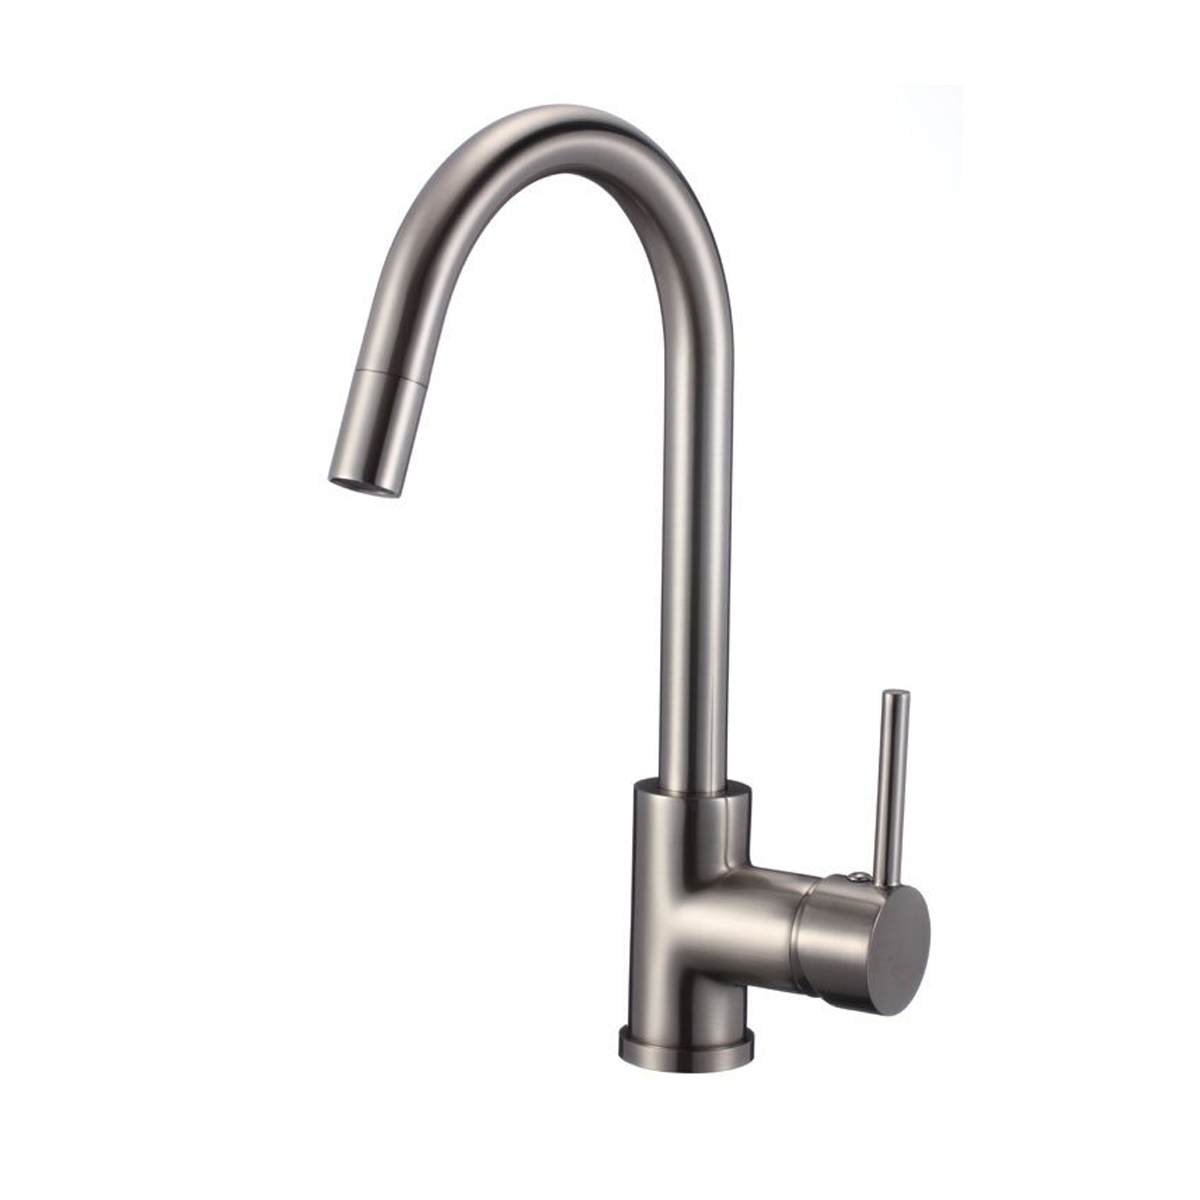 Pelican Int'l Fountain Series PL-8237 Single Hole Kitchen Faucet In Brushed Nickel